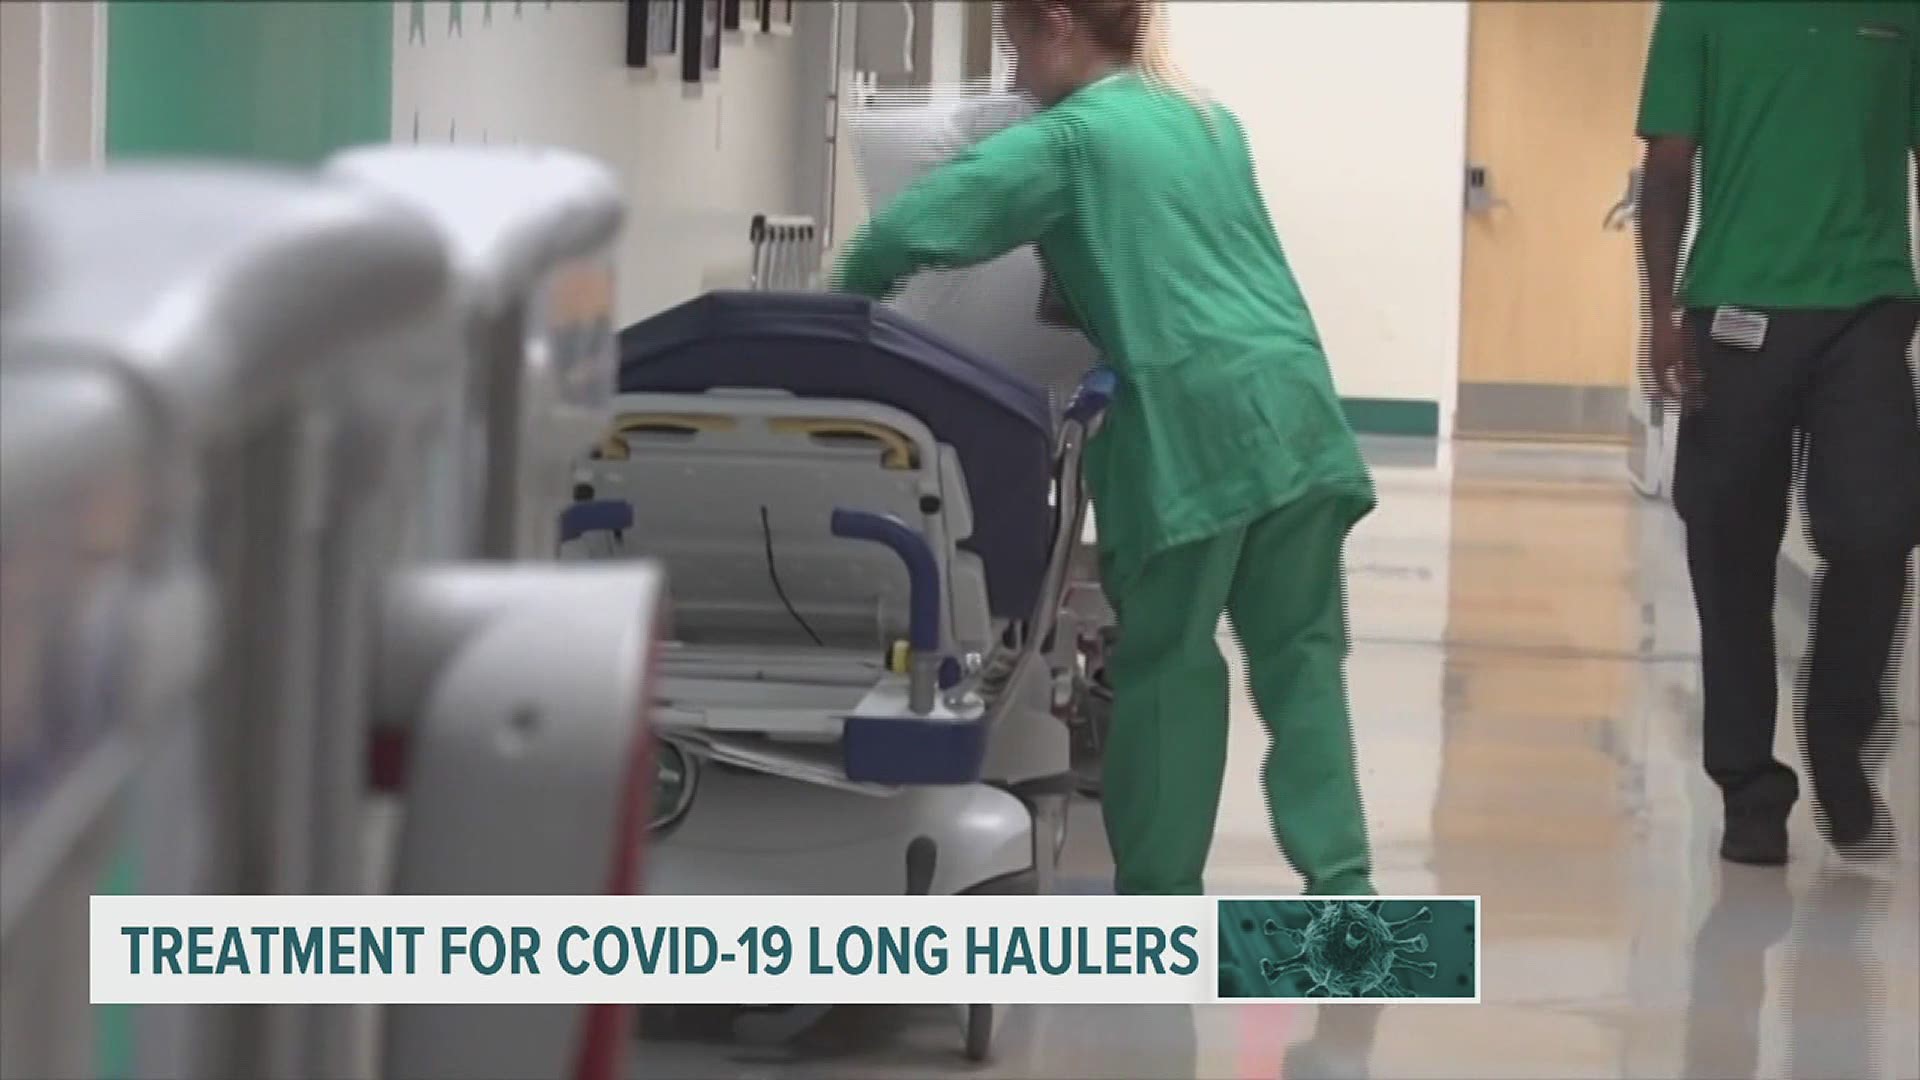 “We have seen those individuals just don’t go back to their lives. they’re still lingering effects of the COVID infection," said Dr. Tudor.